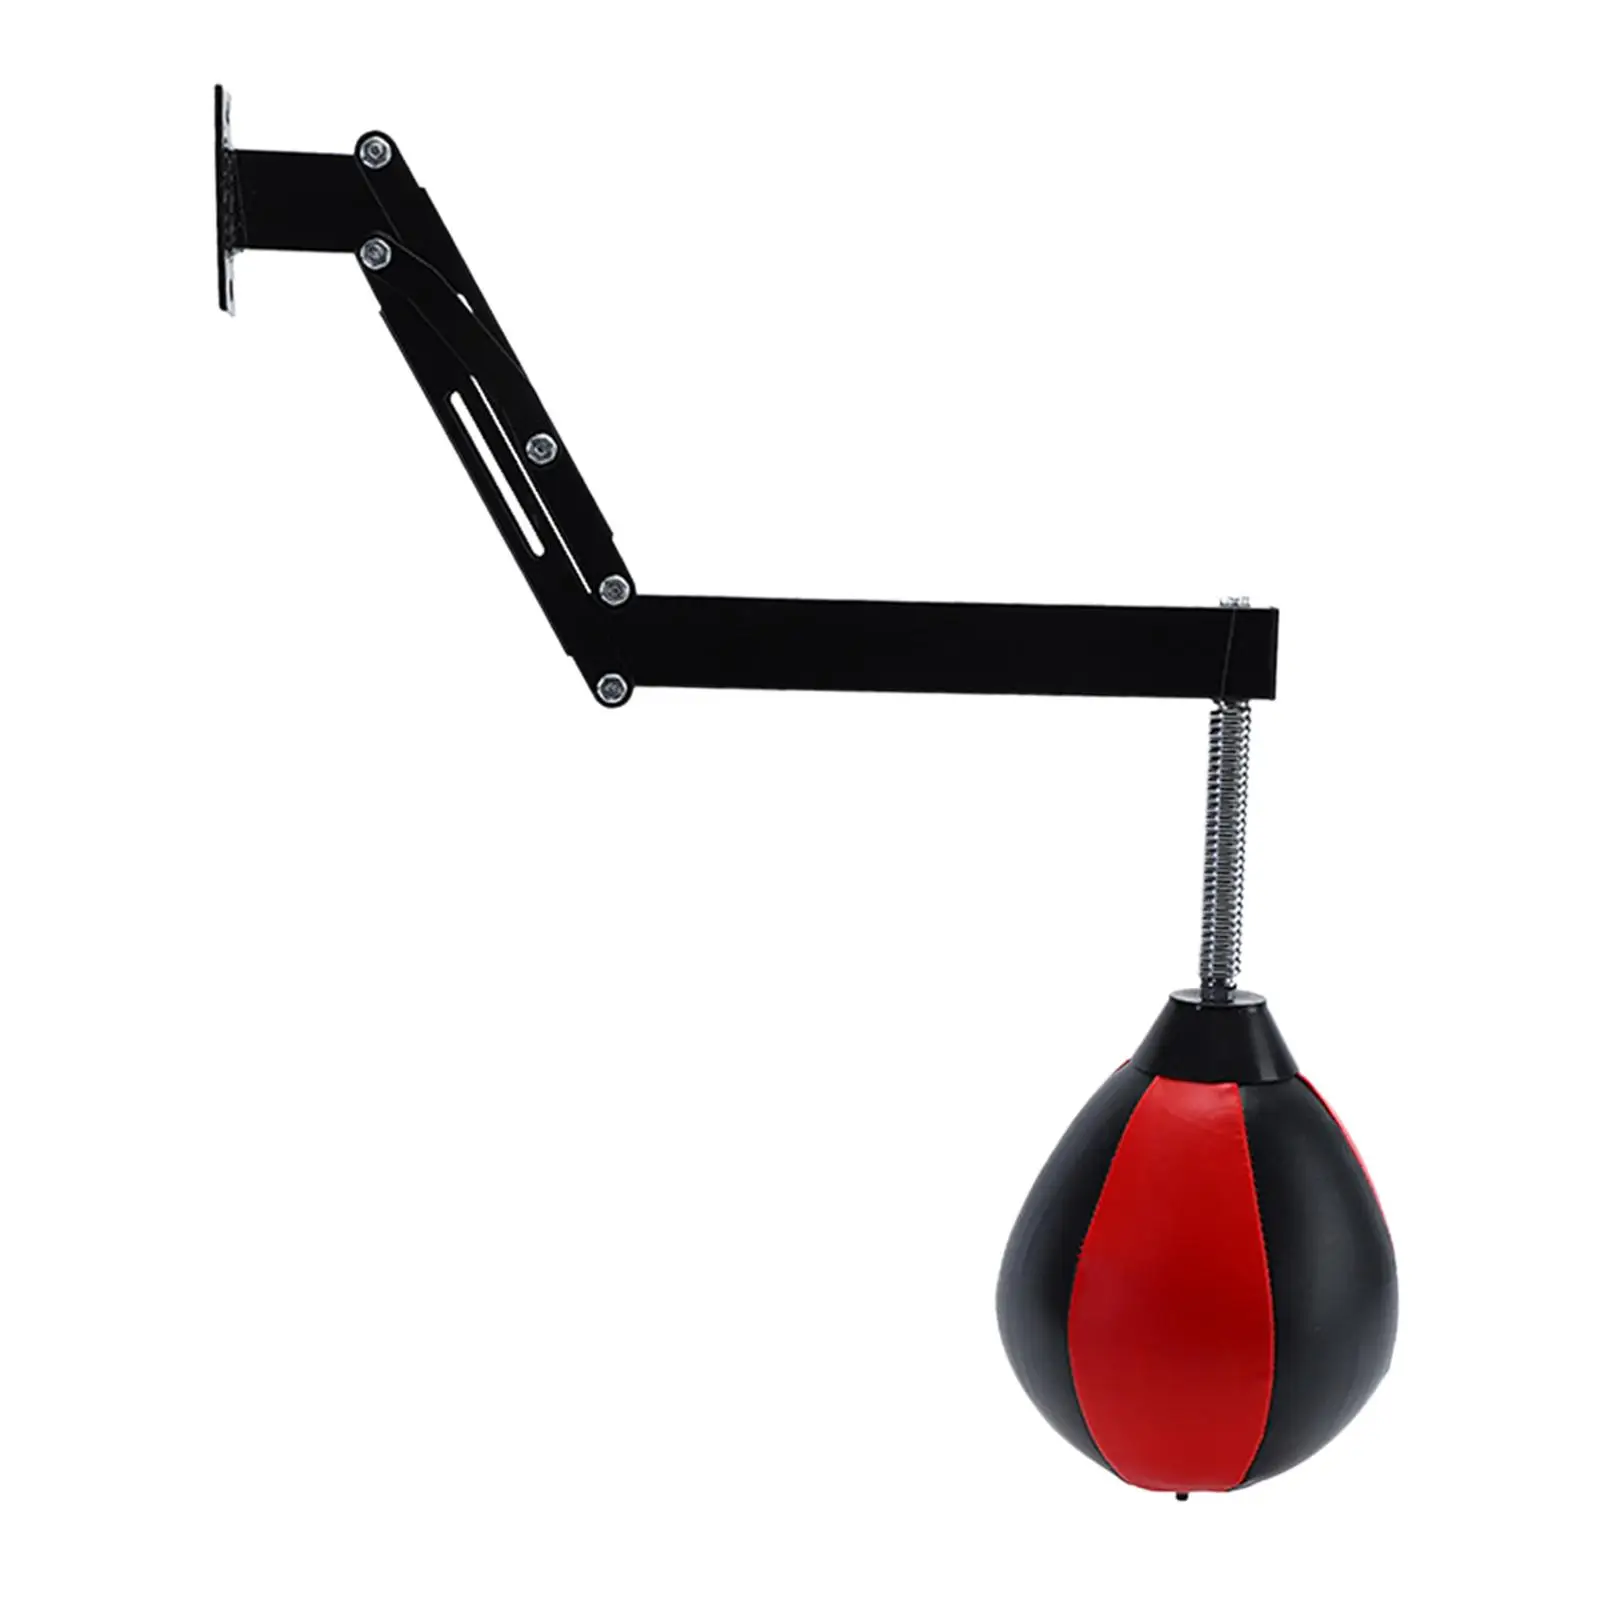 Speed Bag Wall Mount Inflatable Boxing Punching Bag for Sparring Sanda Fighting